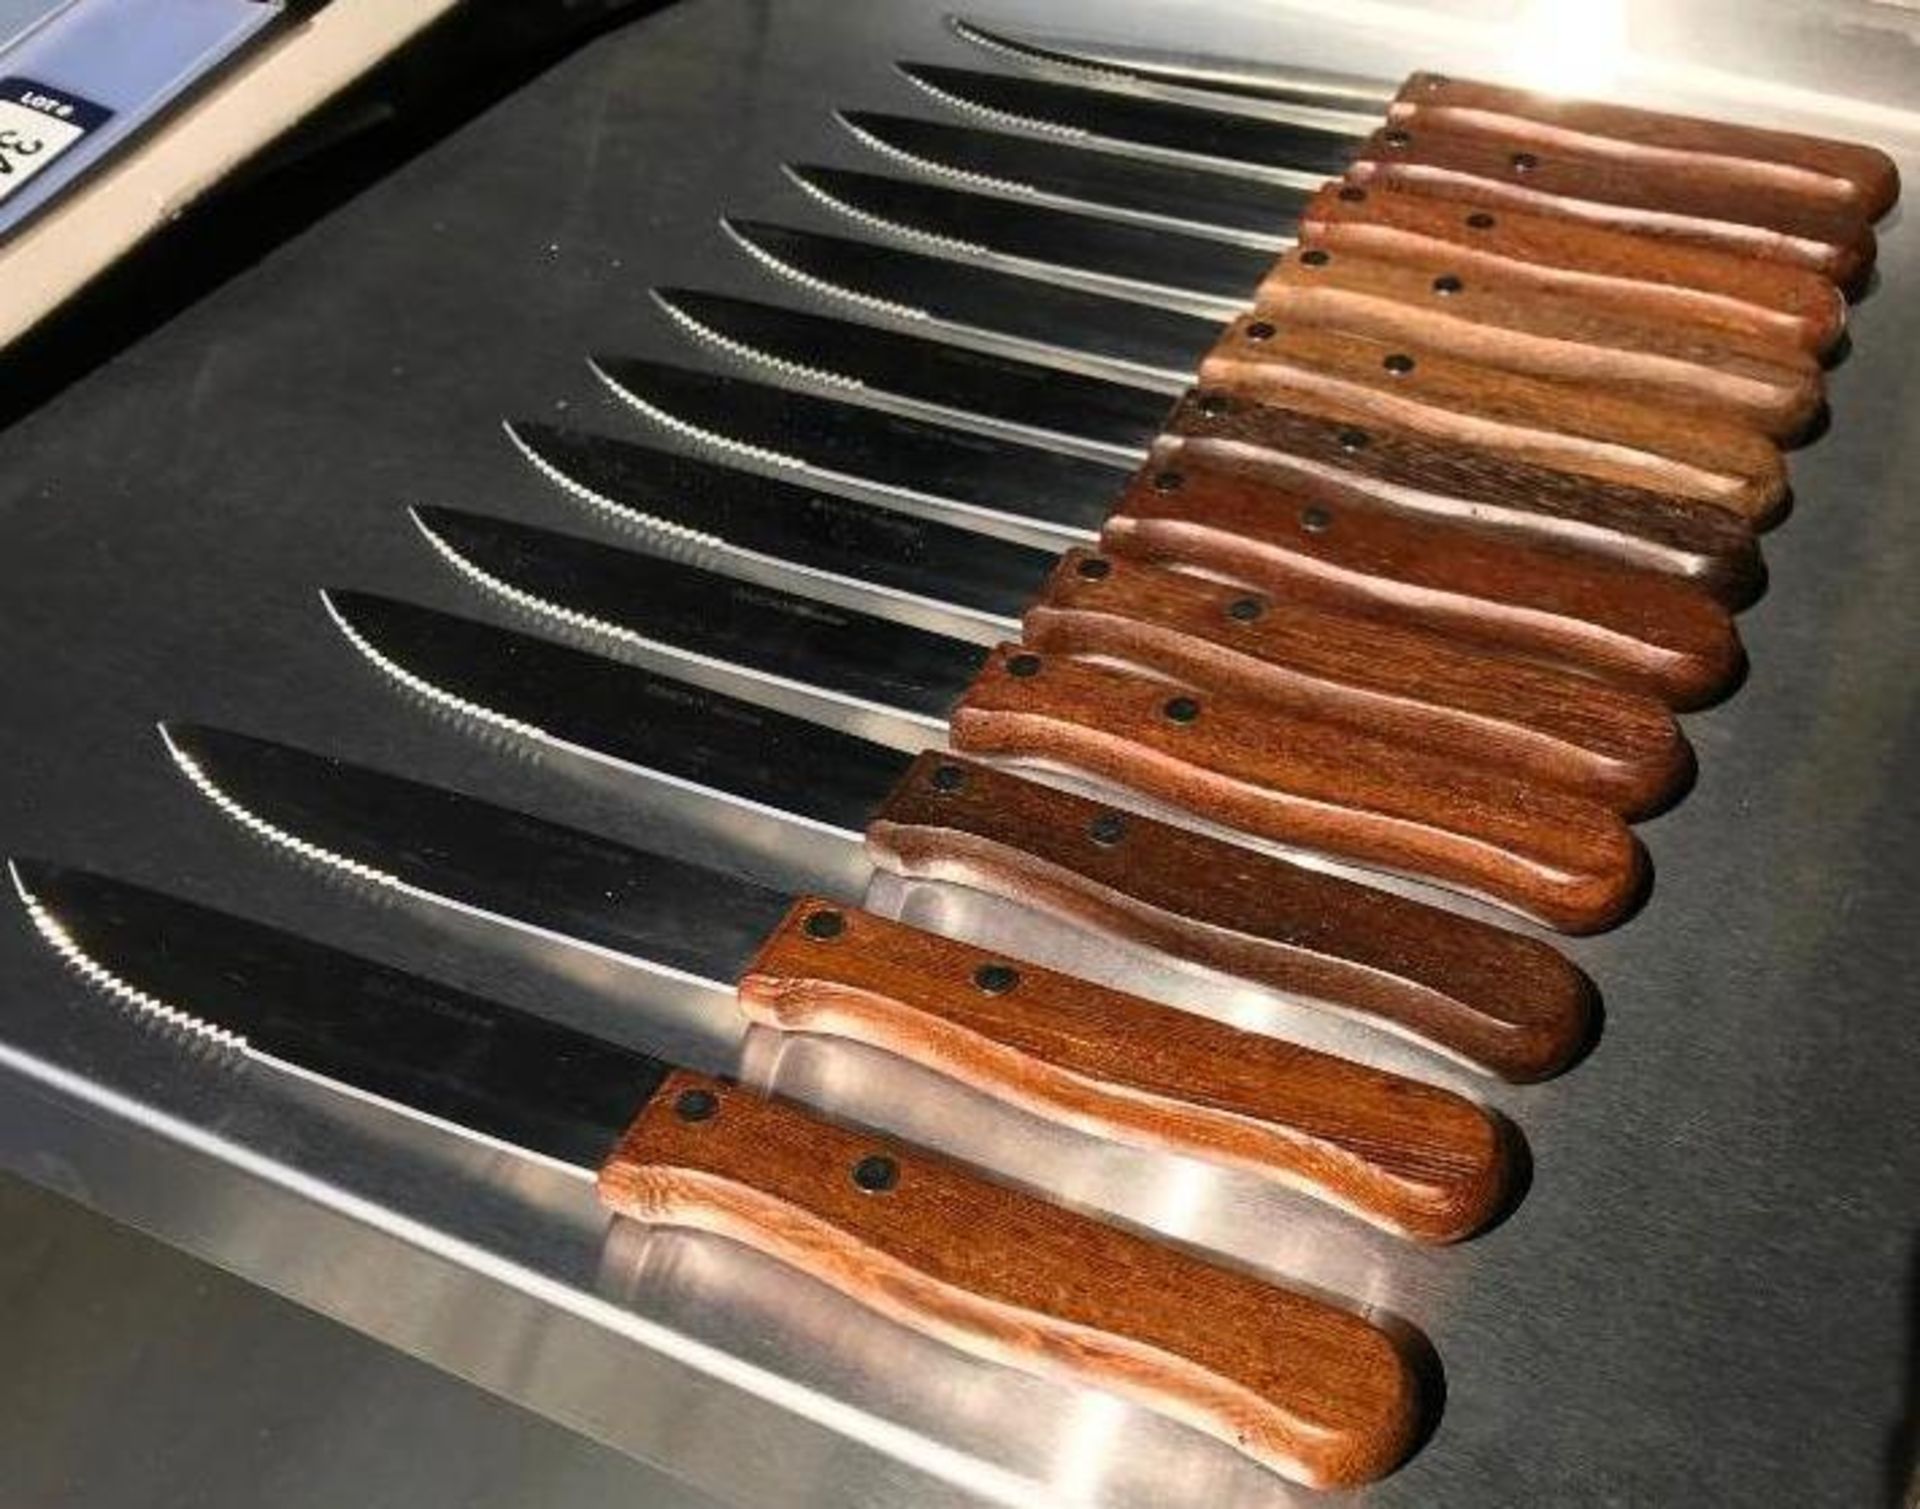 STEAK KNIVES, WOOD HANDLE, POINTED TIP - LOT OF 12 - Image 2 of 8